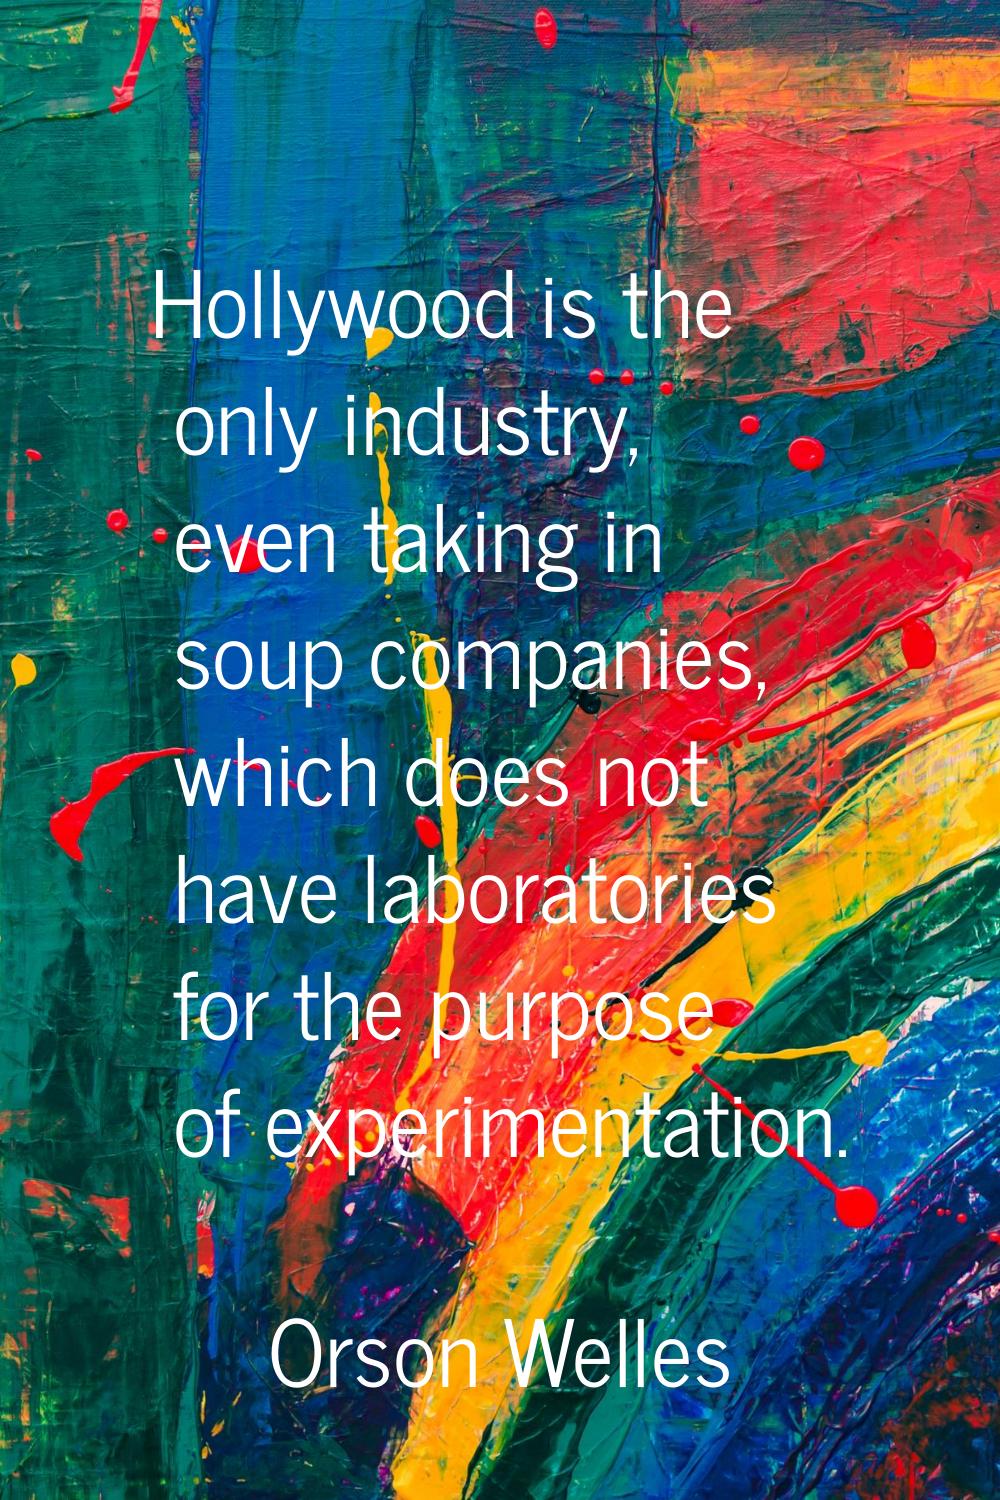 Hollywood is the only industry, even taking in soup companies, which does not have laboratories for